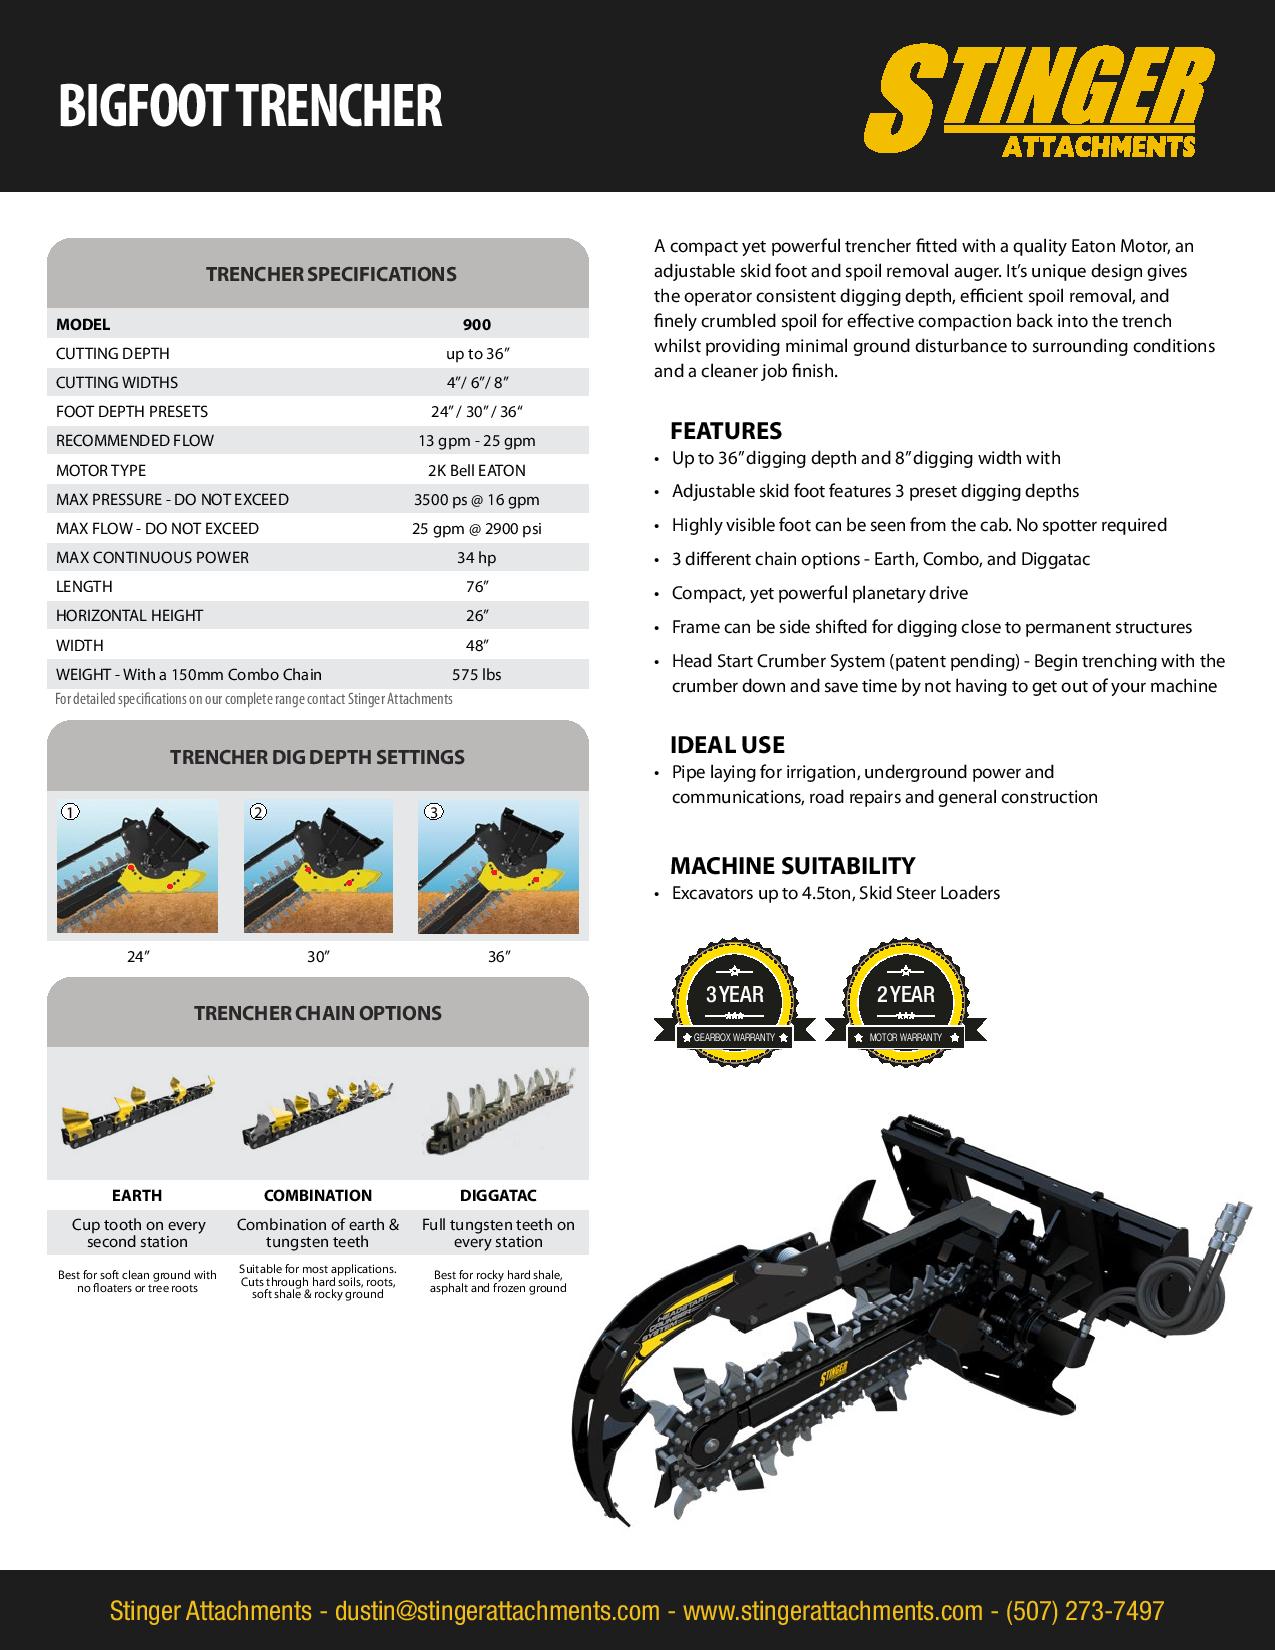 Trencher Informational Sheet